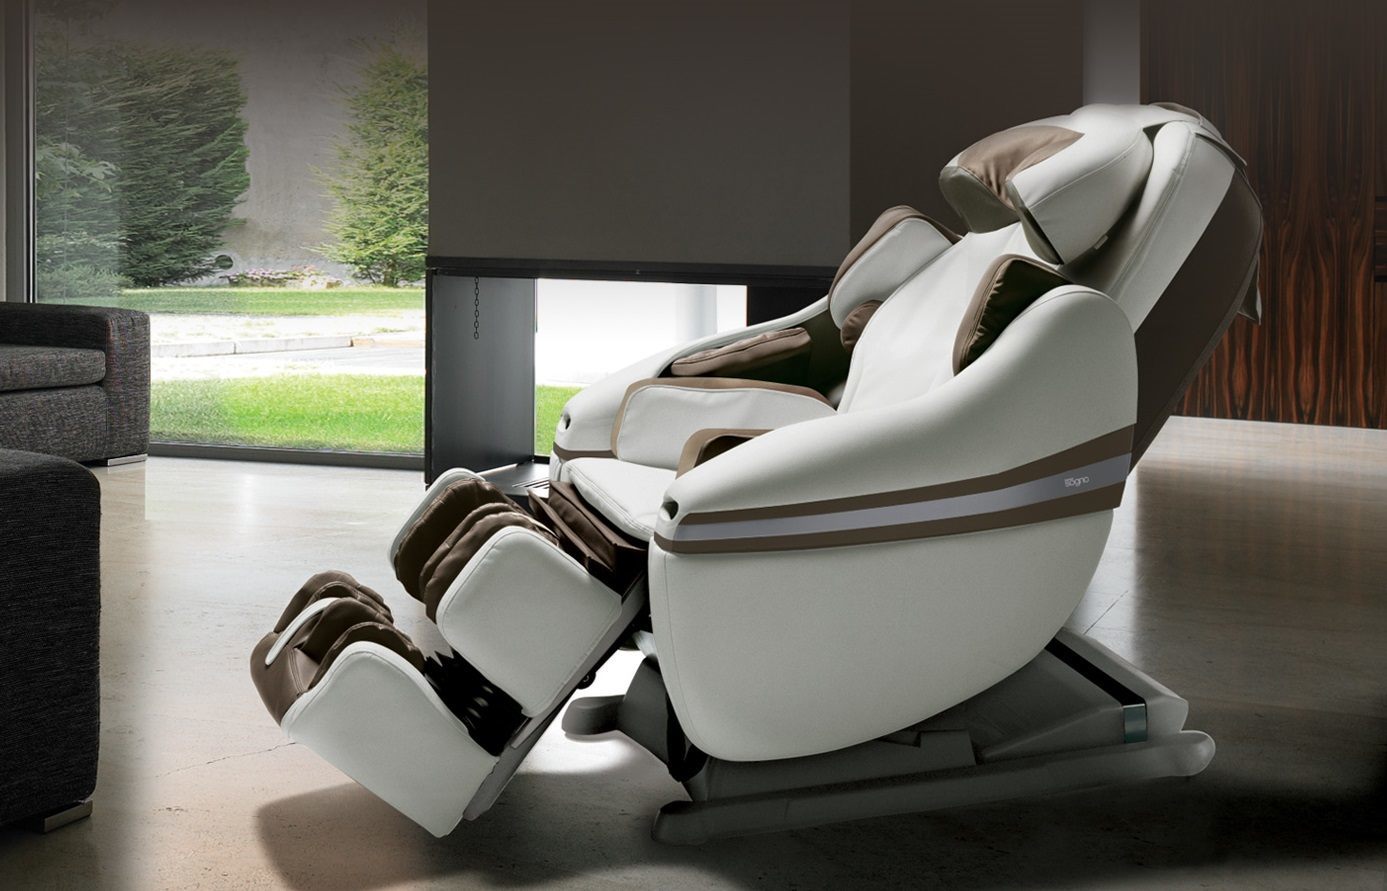 Best Massage Chair For The Money Reviews (2019 Update & Guide)